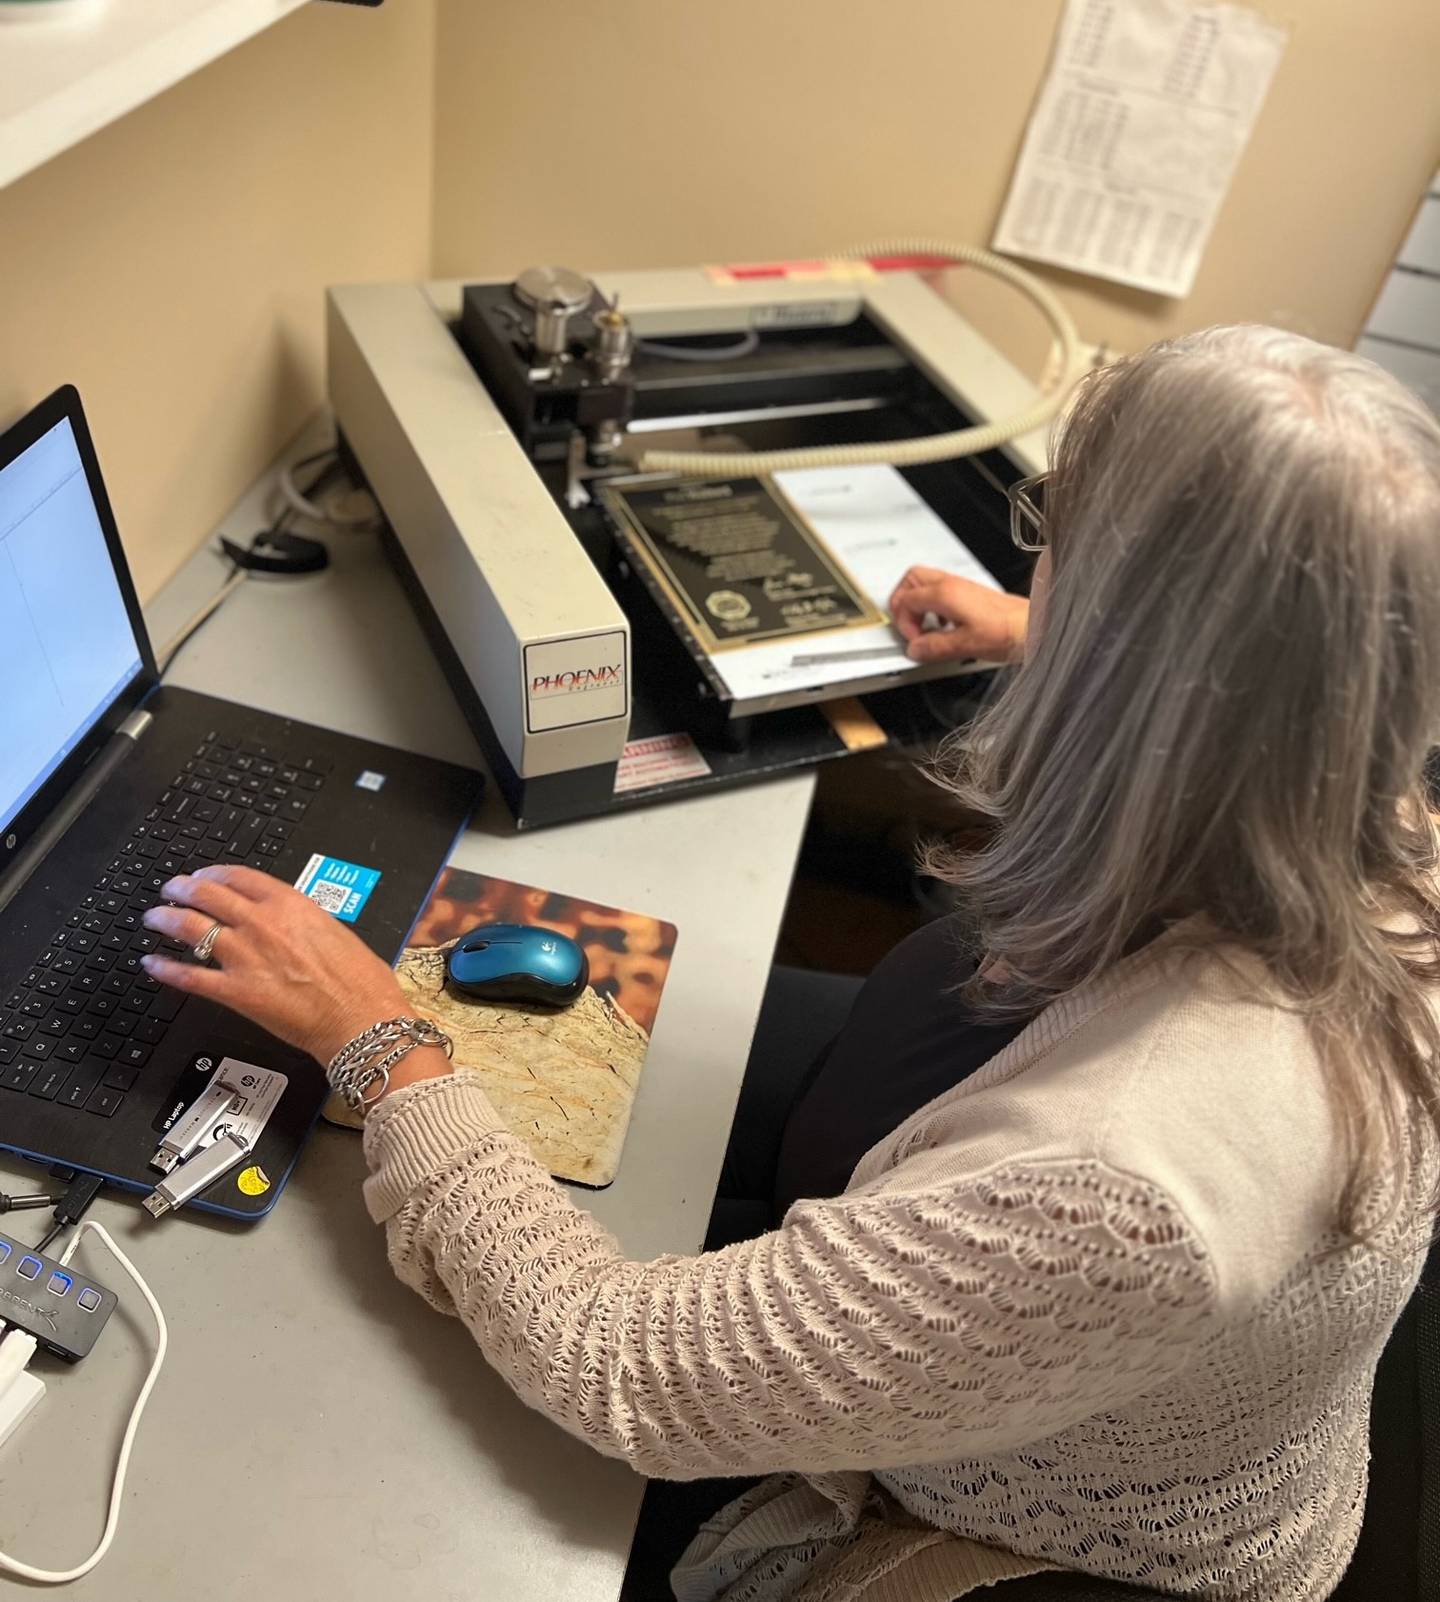 Patty Donahue, owner of Image Awards Engraving and Creative Keepsakes Inc. in Geneva, works on Visions Phoenix 1212 equipment for an engraving project.